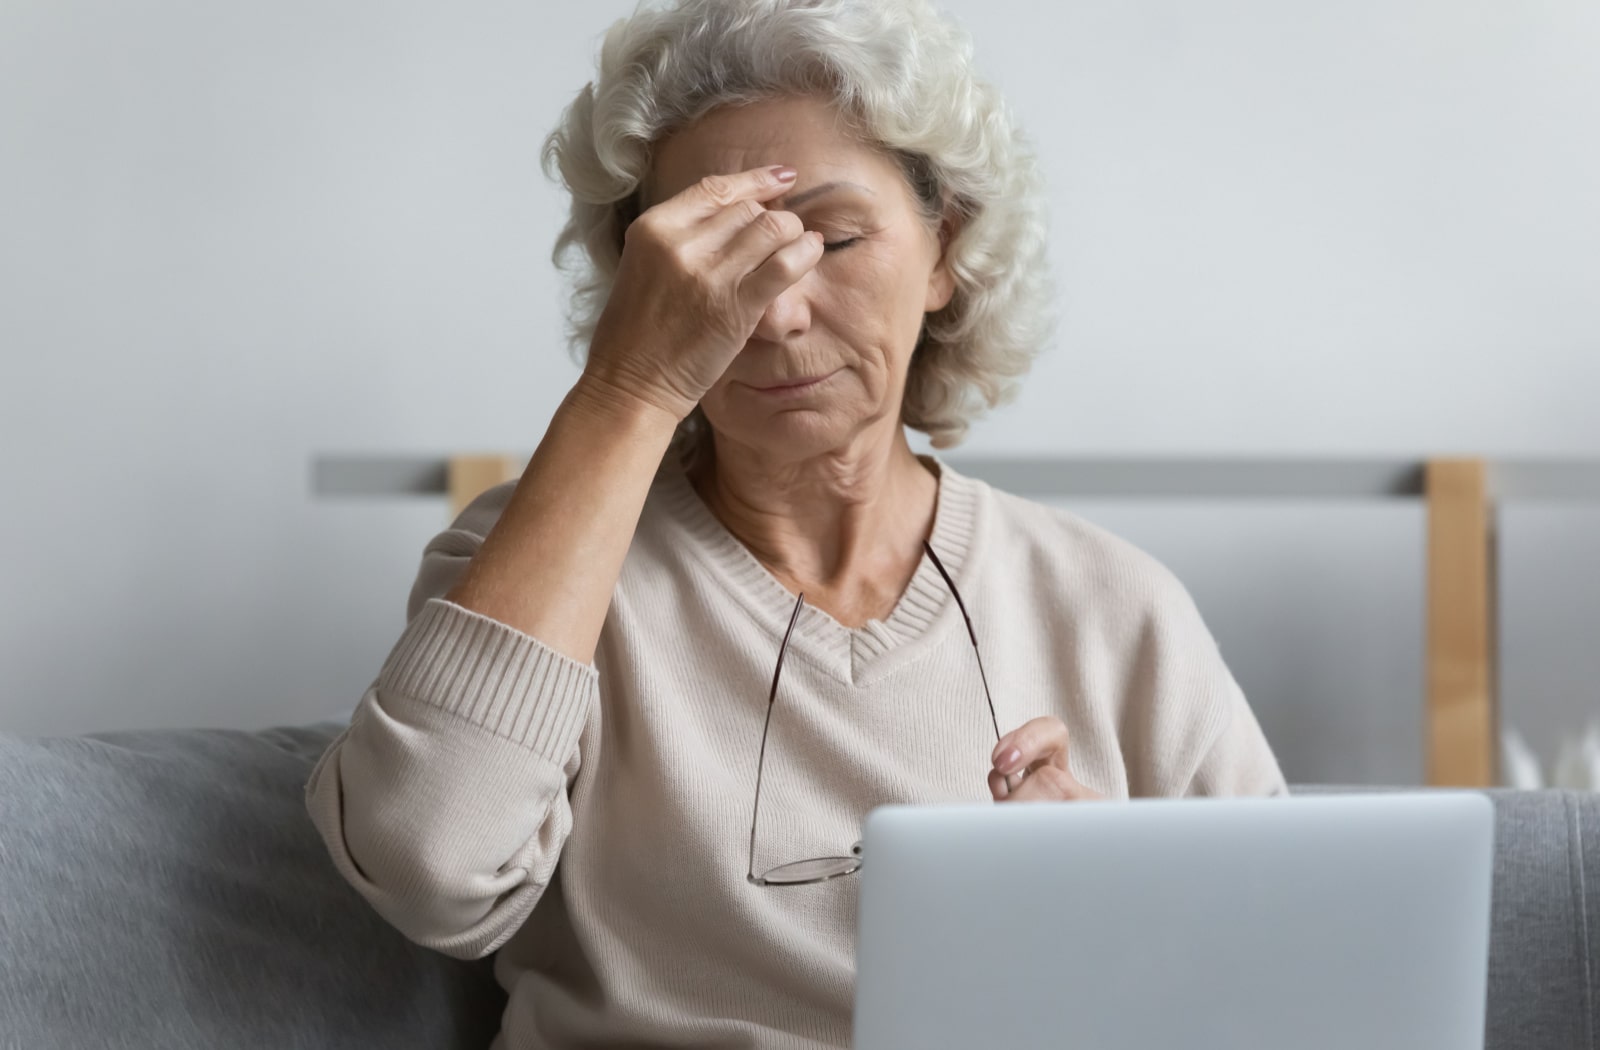 A middle-aged woman sitting on a gray couch with a laptop sitting on her lap. She is taking off her glasses and rubbing the bridge of her nose due to eye pain.